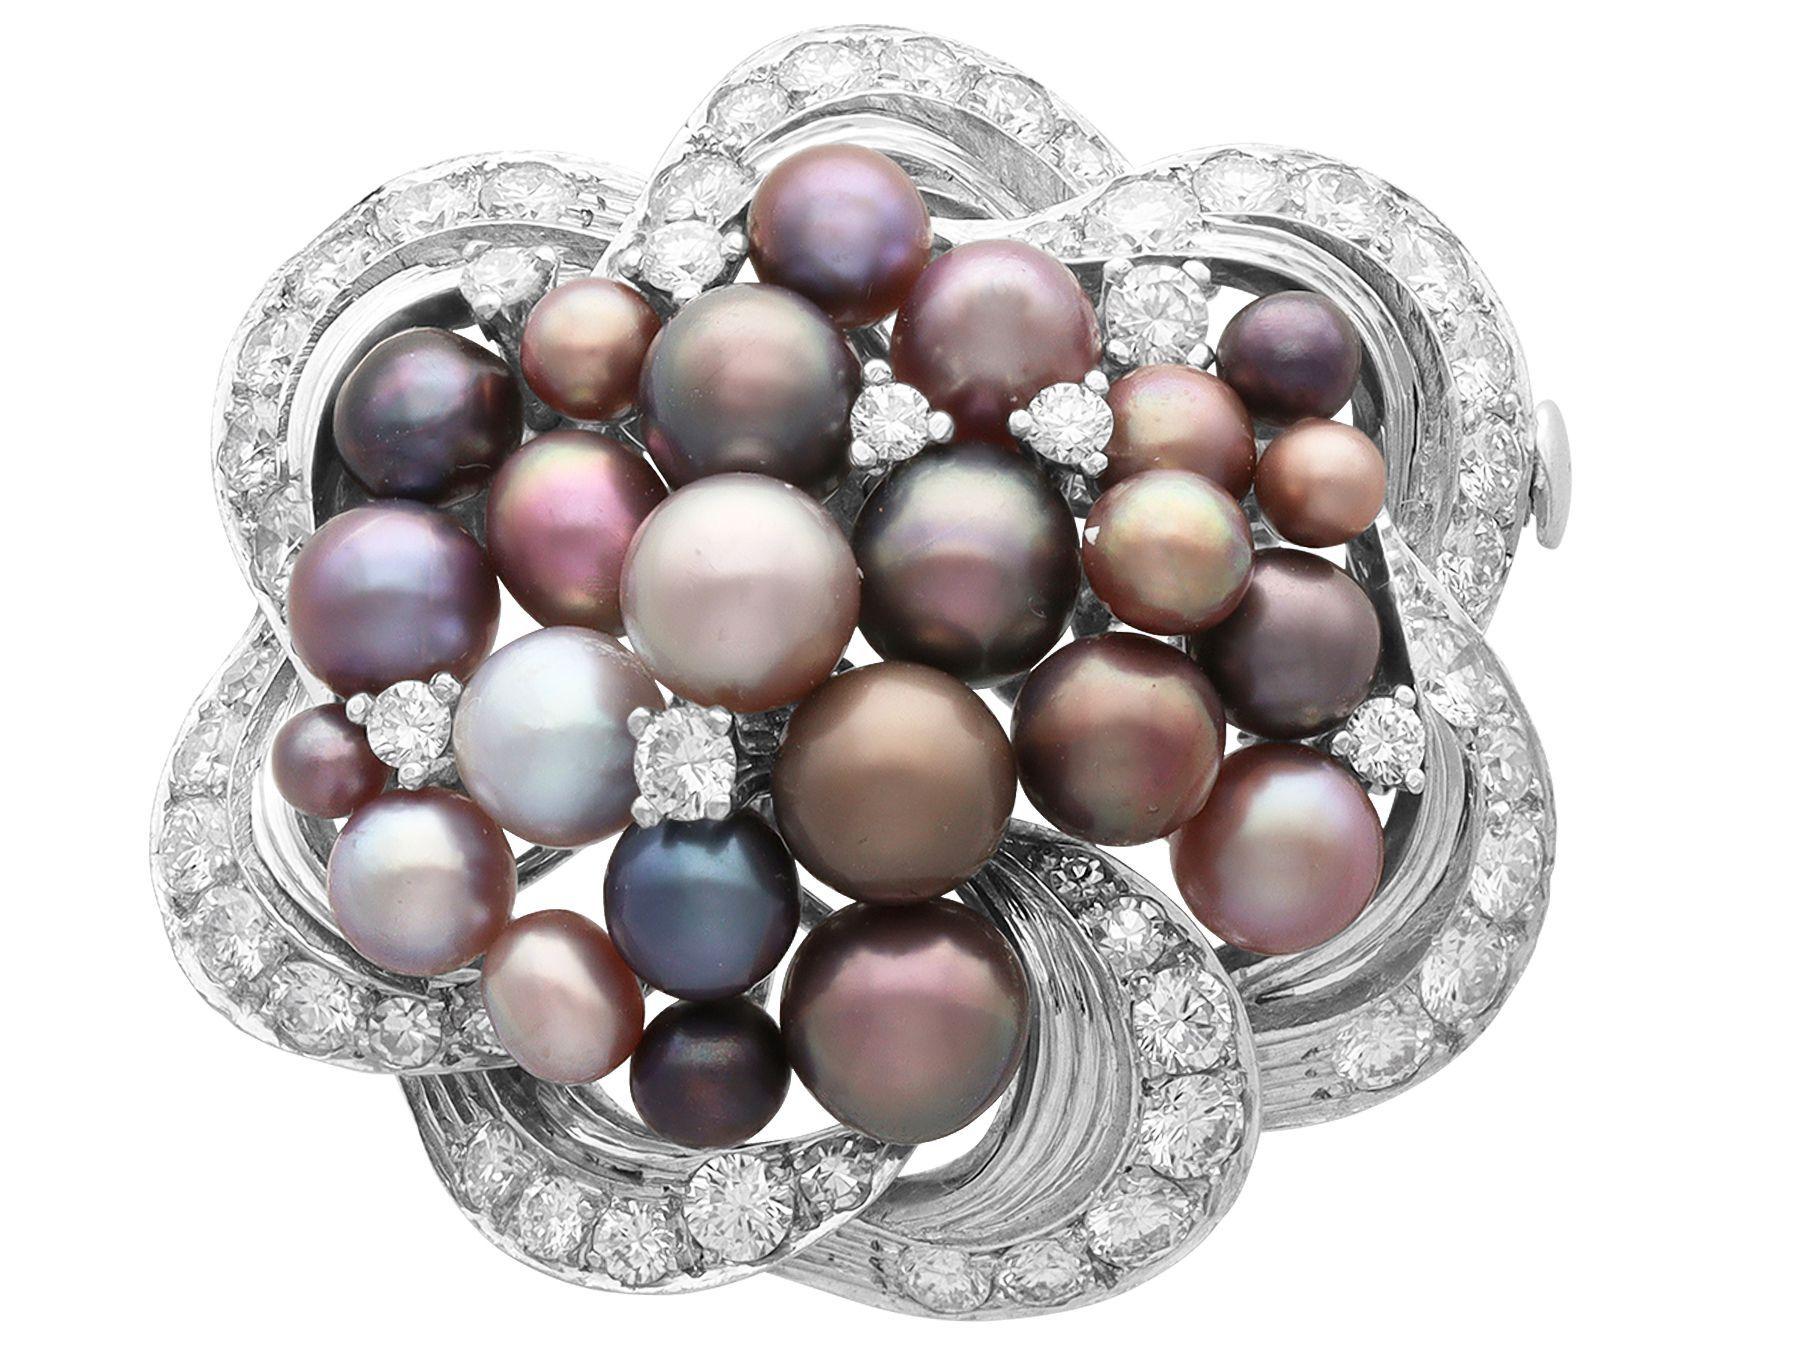 A magnificent, fine and impressive vintage 1950s 2.92 carat diamond and natural saltwater pearl, 18k white gold Asprey jewelry set of a brooch, ring and earrings; part of our diverse diamond jewelry collections.

This stunning, fine and impressive